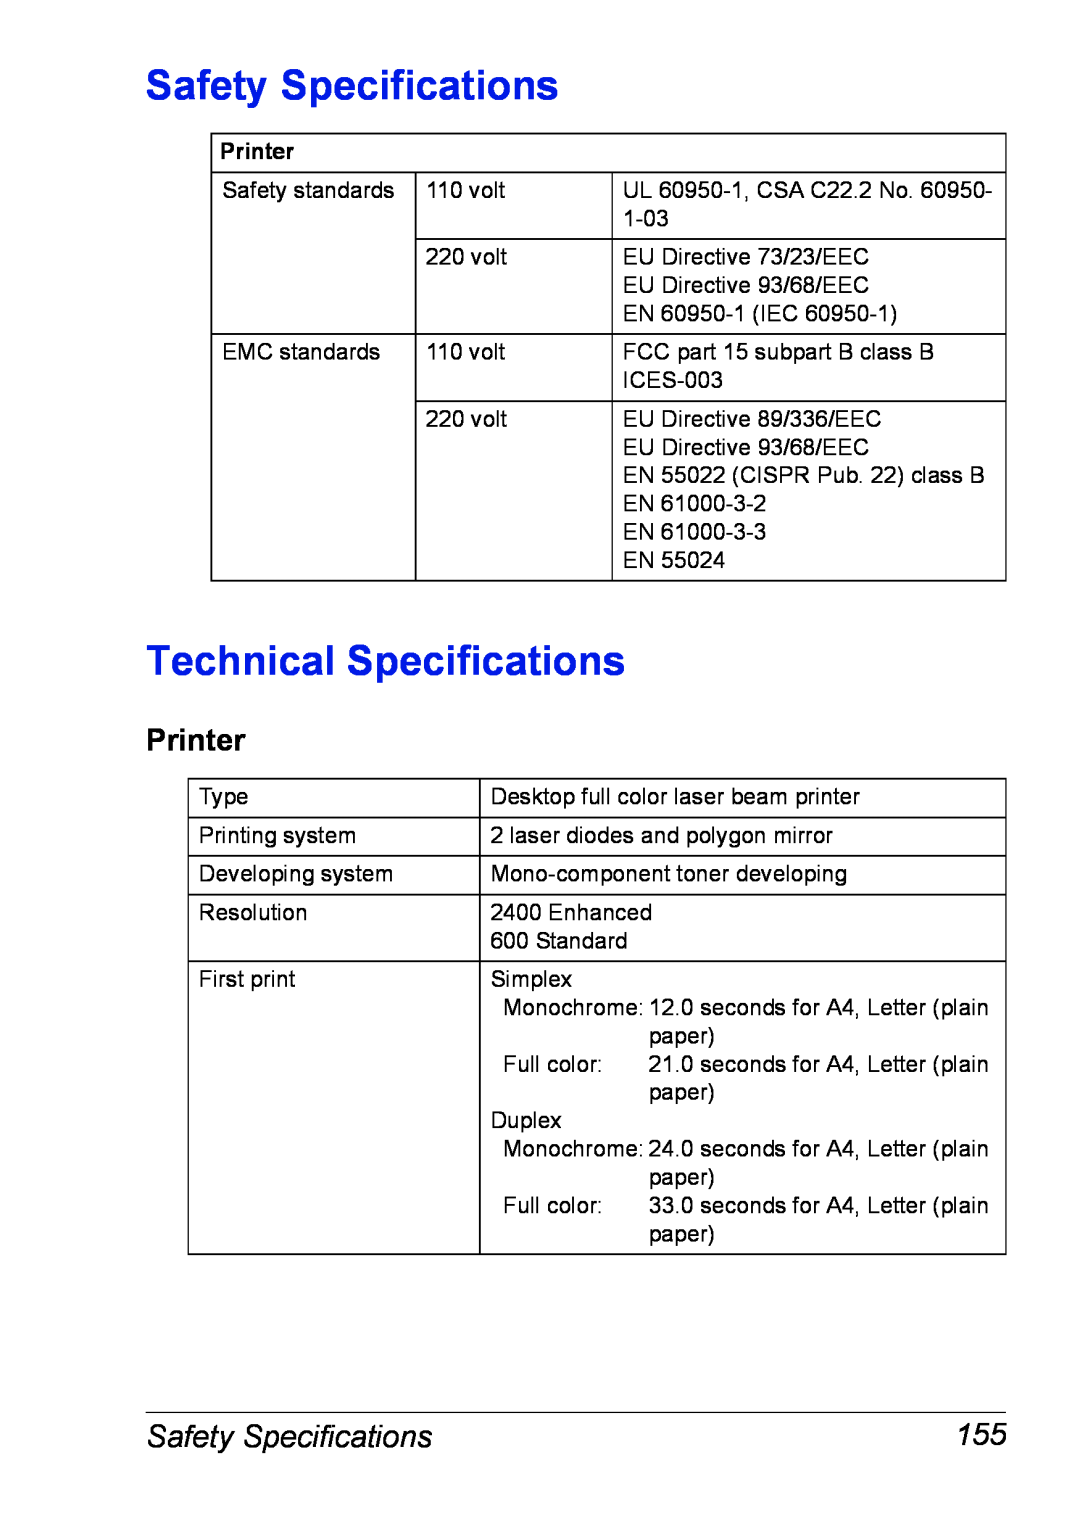 Xerox 6120 manual Safety Specifications, Technical Specifications, Printer 